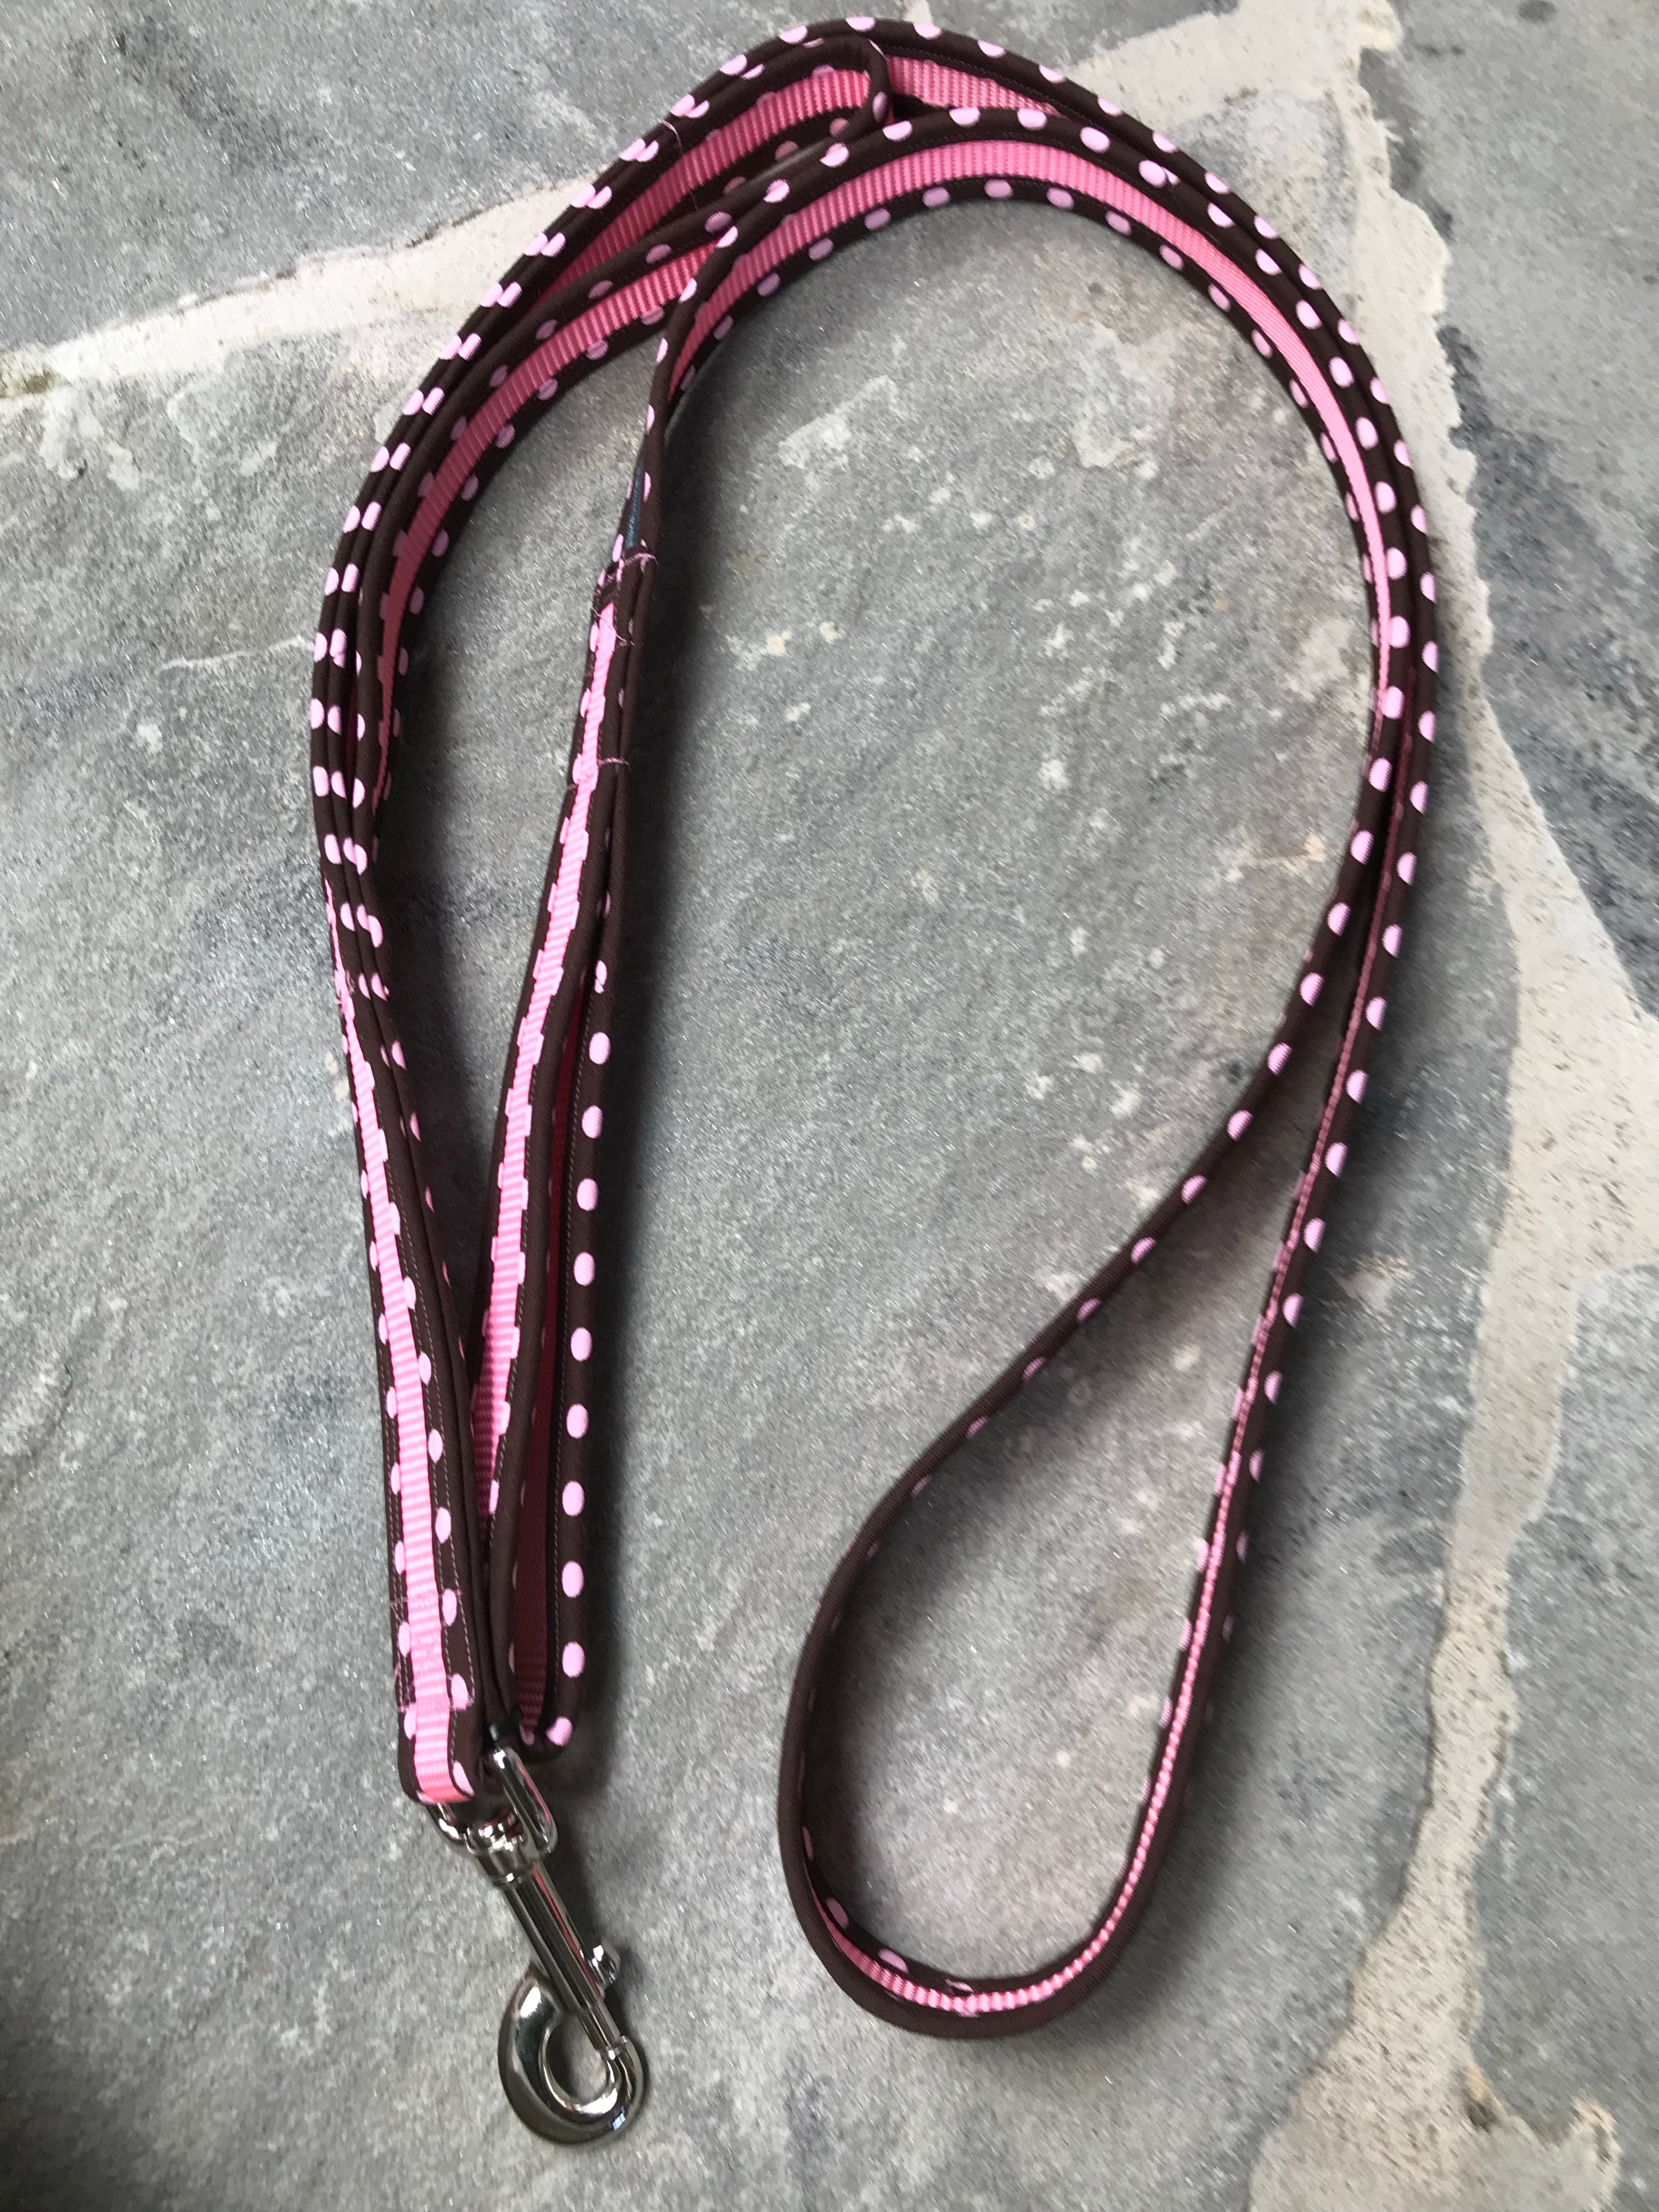 Double Handle Dog Leash | Brown Pink Dot | Stitchpet